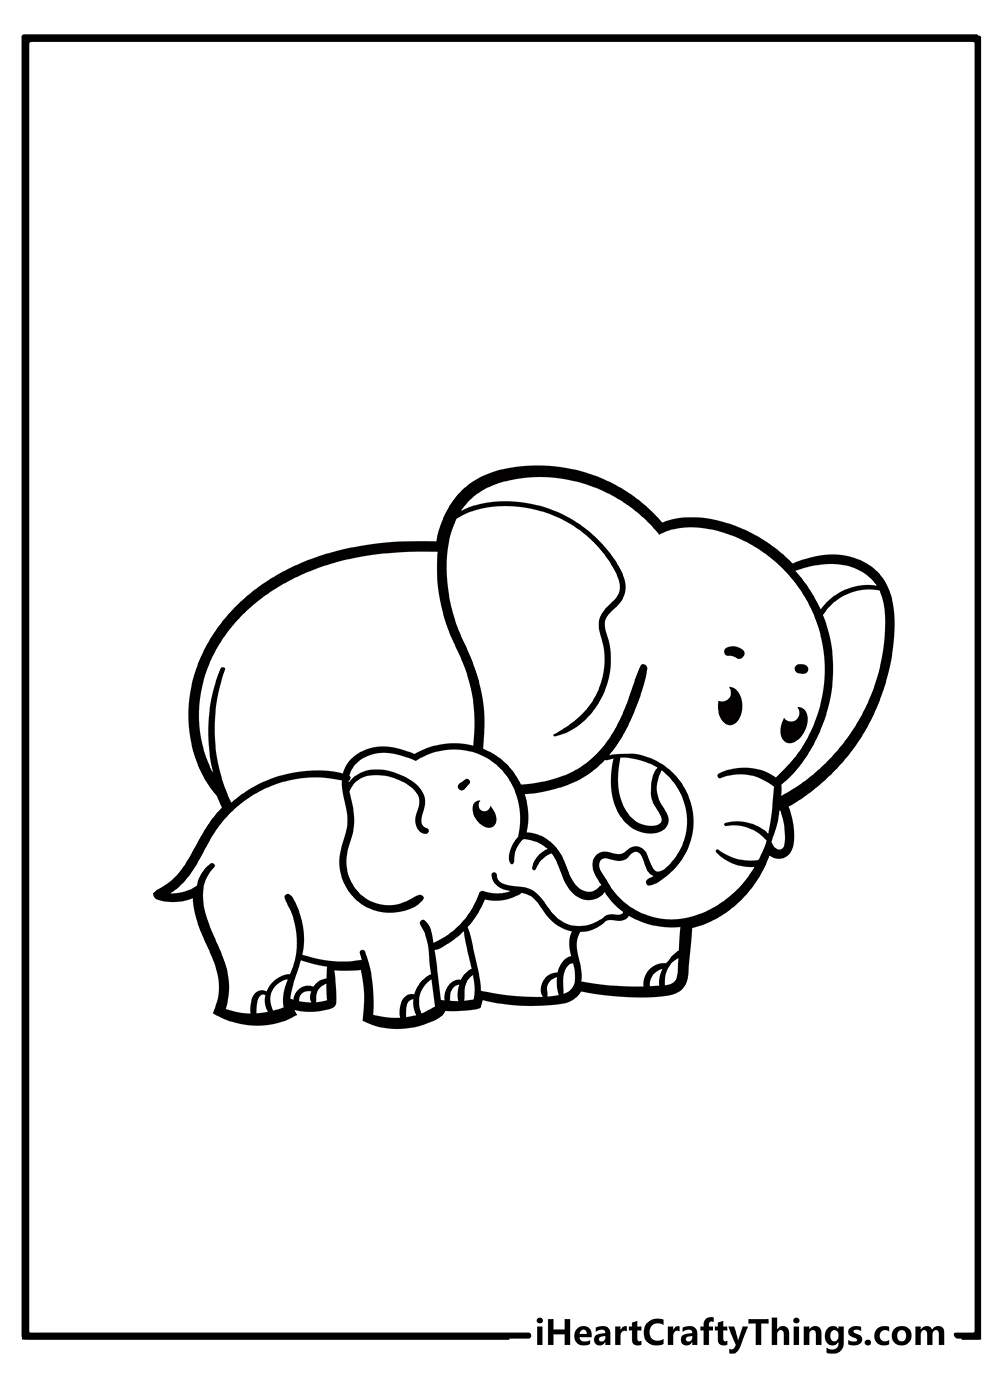 Elephant Coloring Pages for preschoolers free printable